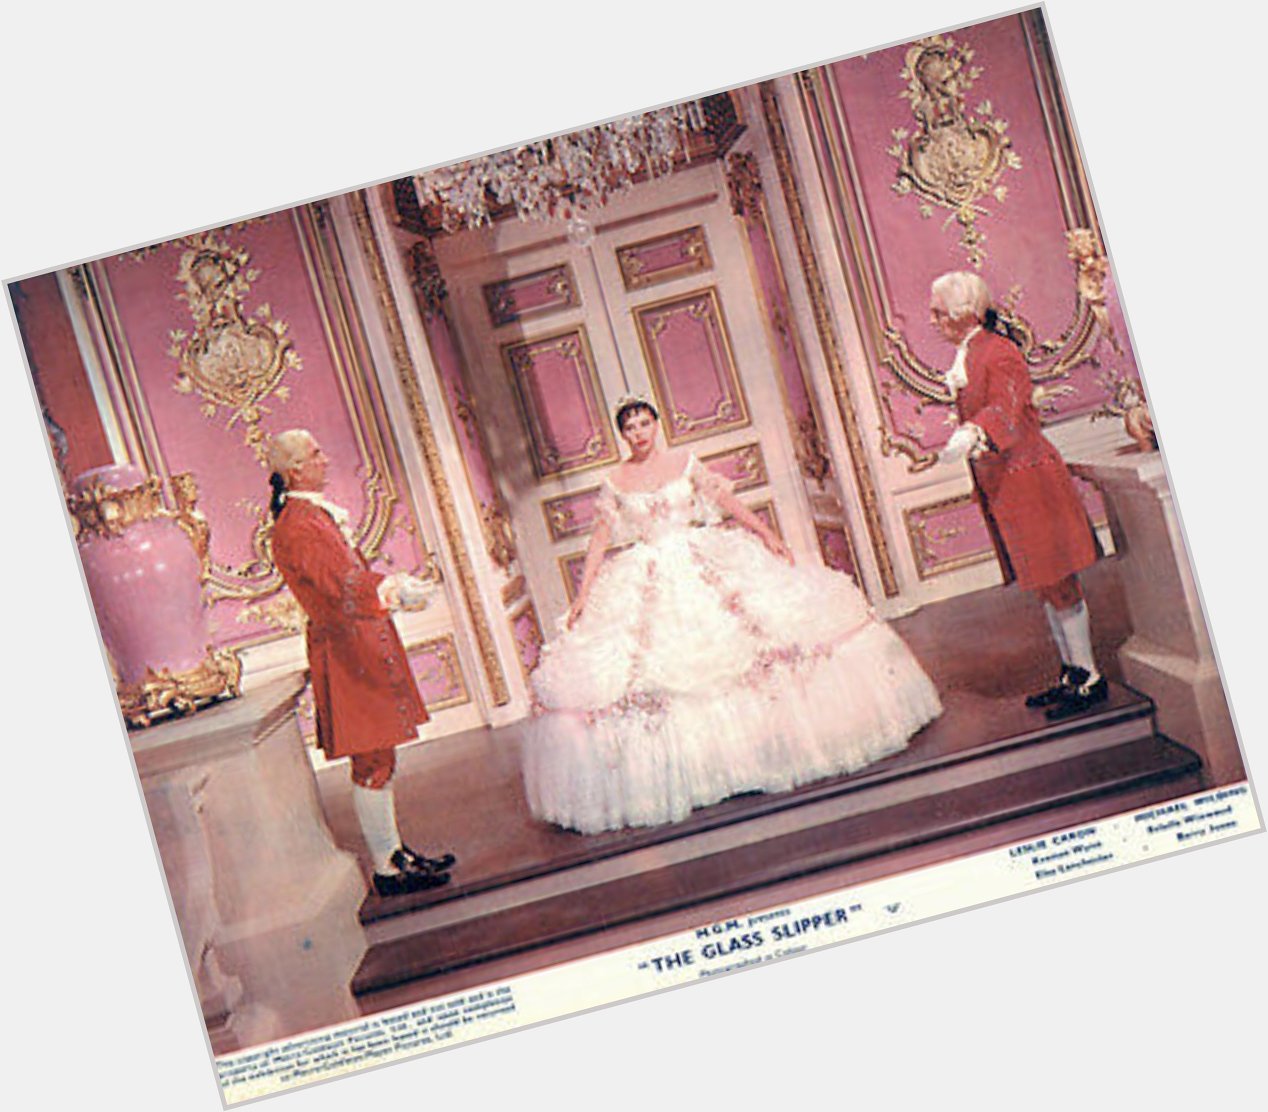 Happy 88th Birthday Leslie Caron! Born today July 1, in 1931.  Photo of her in THE GLASS SLIPPER (1955) 